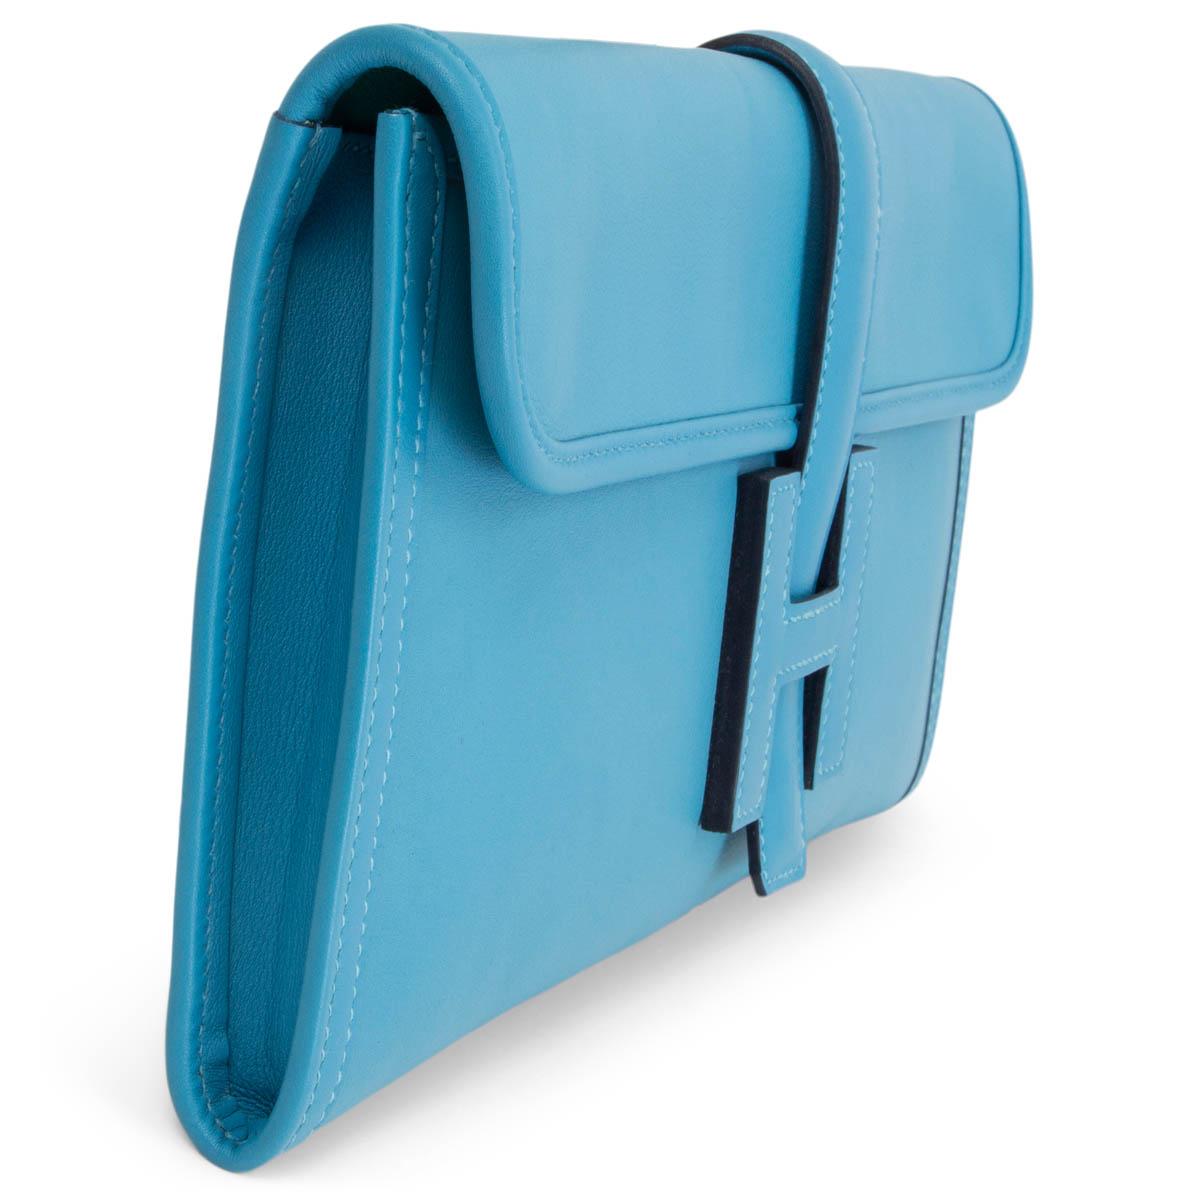 100% authentic Hermès Jige Elan 29 Verso clutch in Bleu du Nord and Vert Verone in Veau Swift leather. There is a crossover flap and a strap that tucks under a leather Hermès 